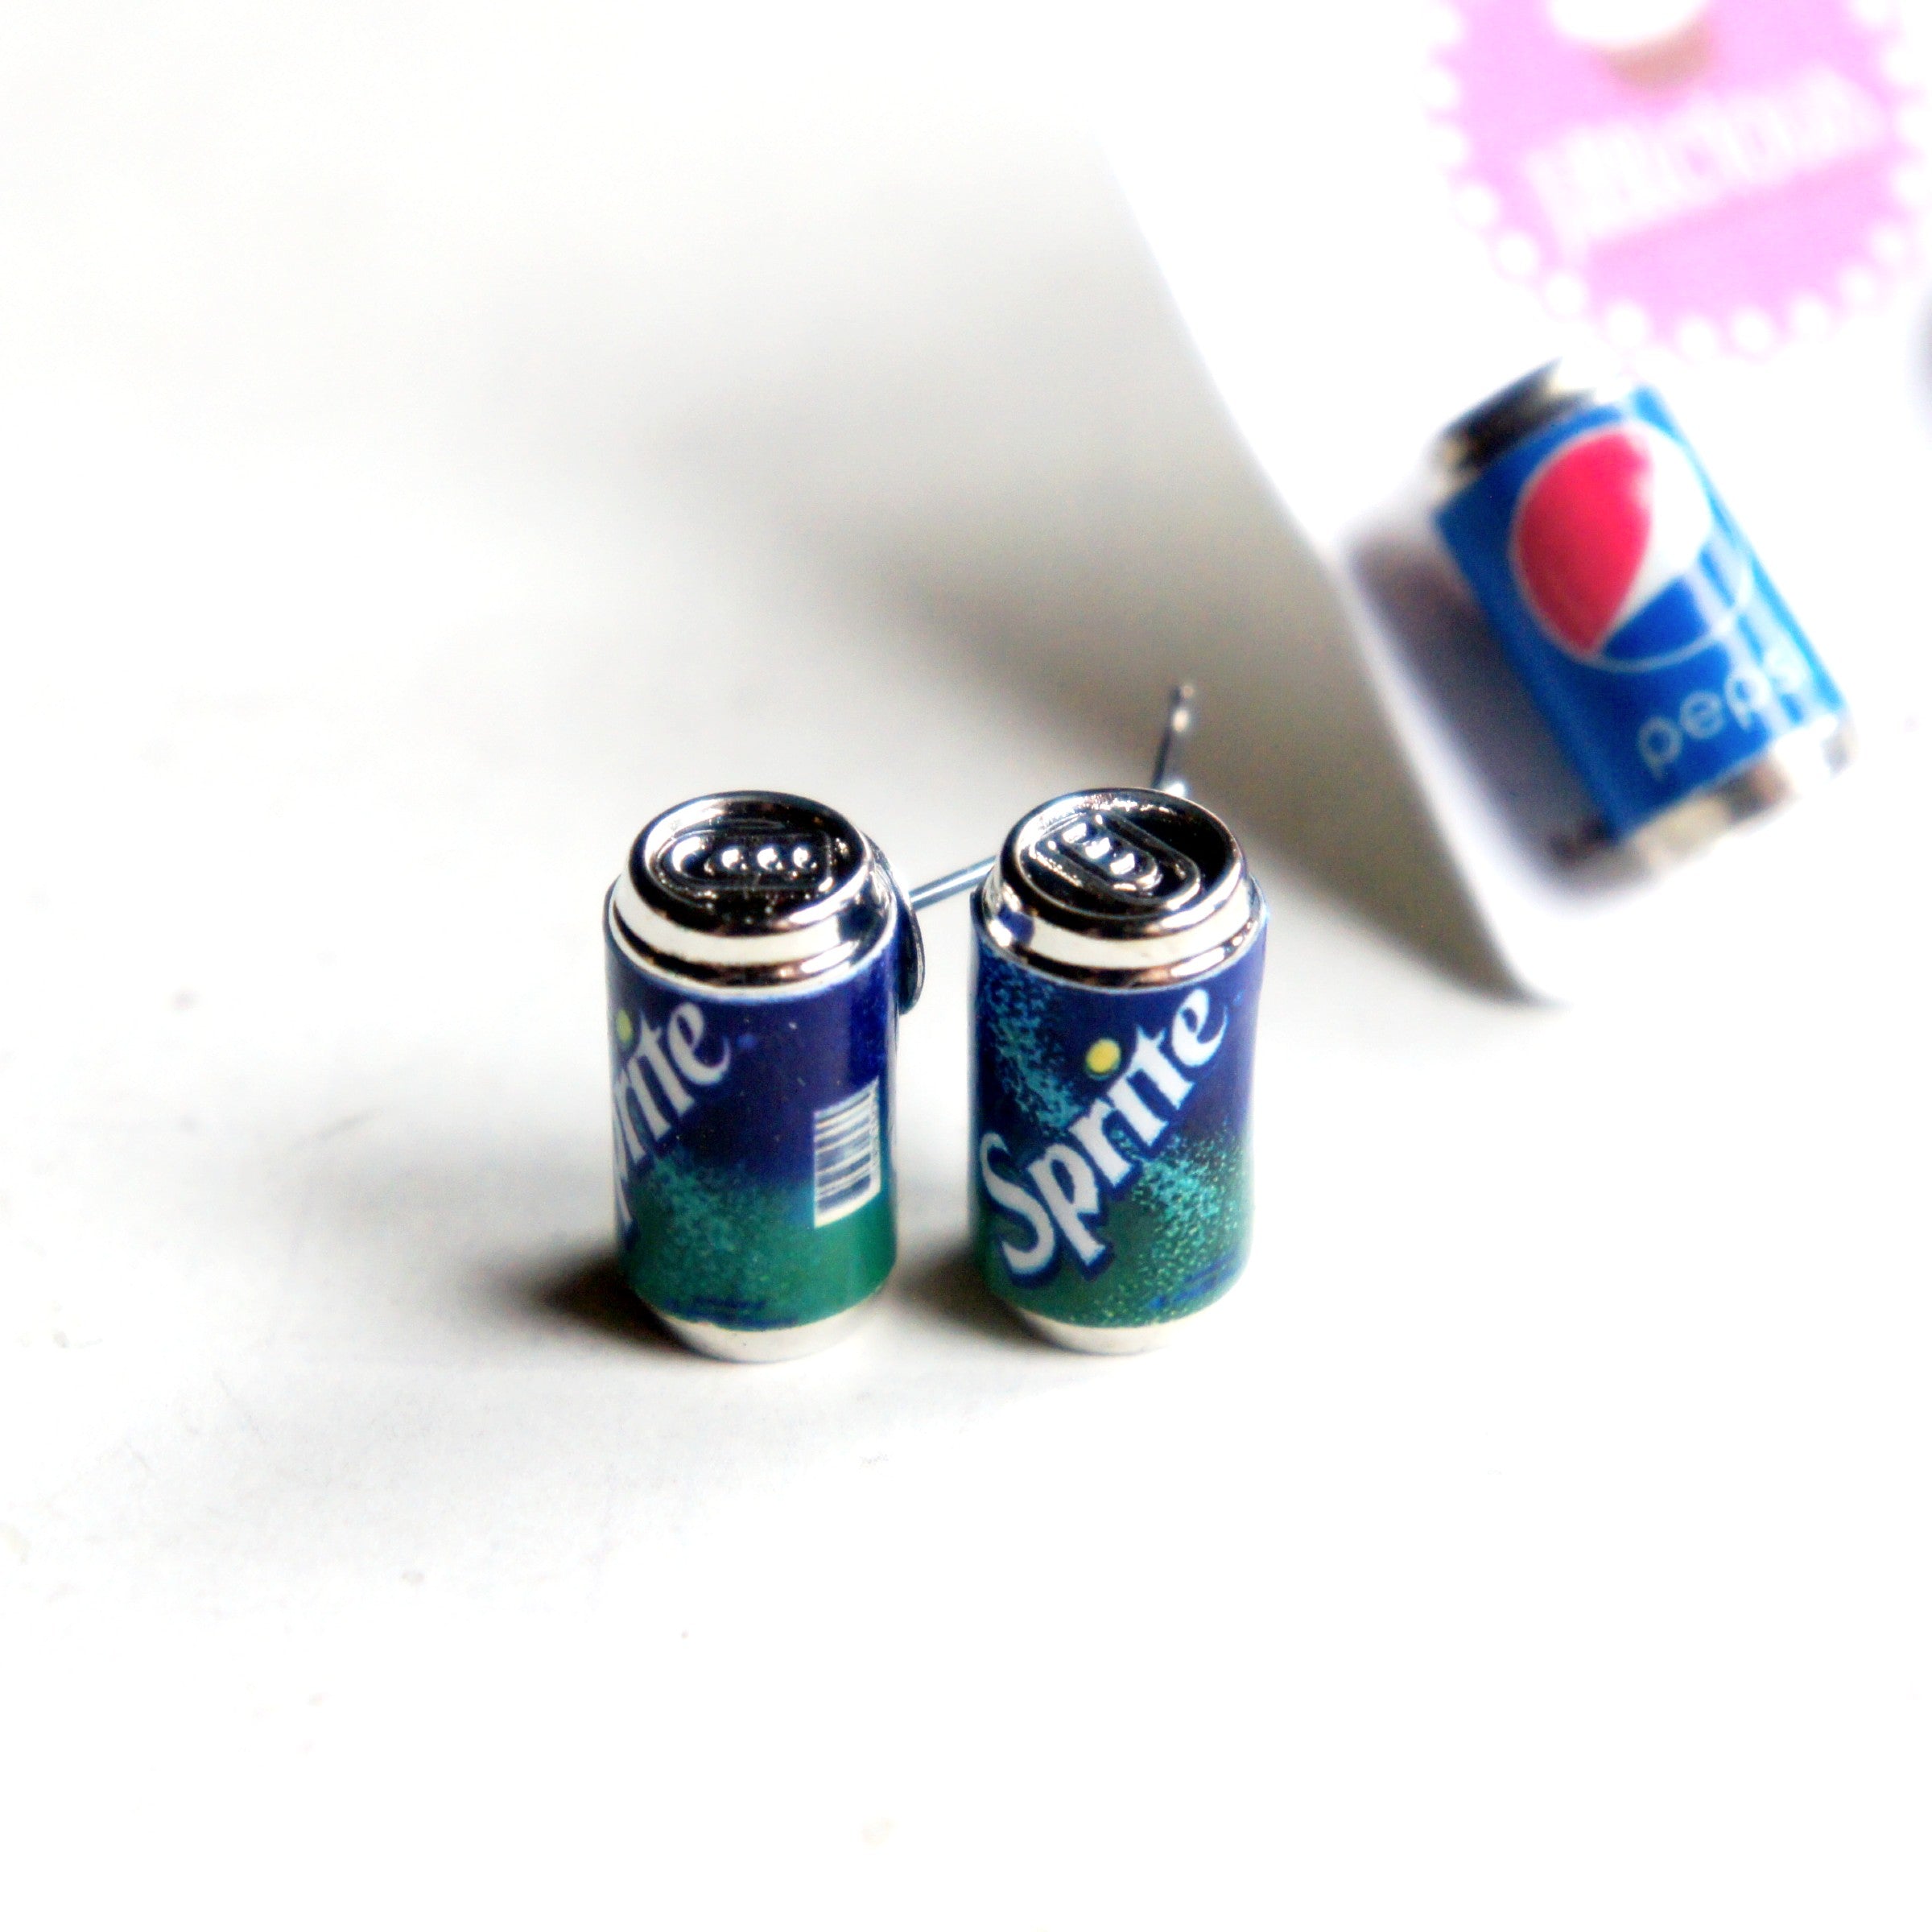 Sprite Soda Can Earrings - Jillicious charms and accessories